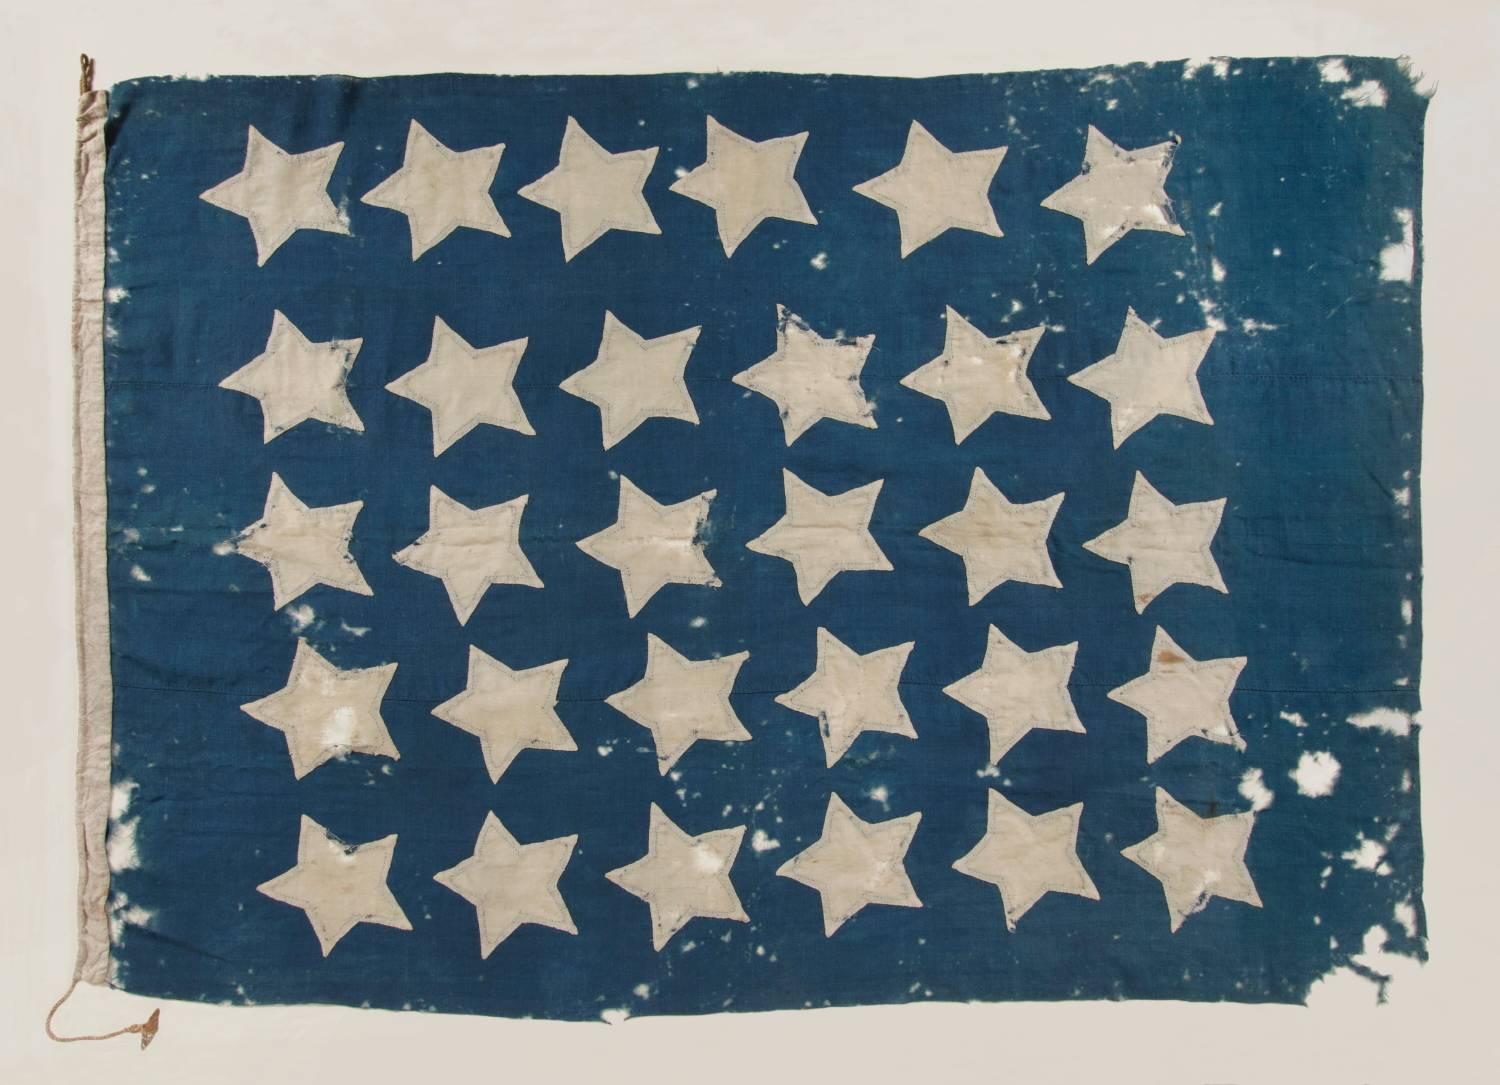 U.S. NAVY JACK WITH 30 STARS, AN ENTIRELY HAND-SEWN, PRE-CIVIL WAR EXAMPLE WITH GREAT COLOR AND BOLD VISUAL QUALITIES, WISCONSIN STATEHOOD, 1848-1850:

Like the British Royal Navy, American vessels flew three flags. When at anchor or moored, the